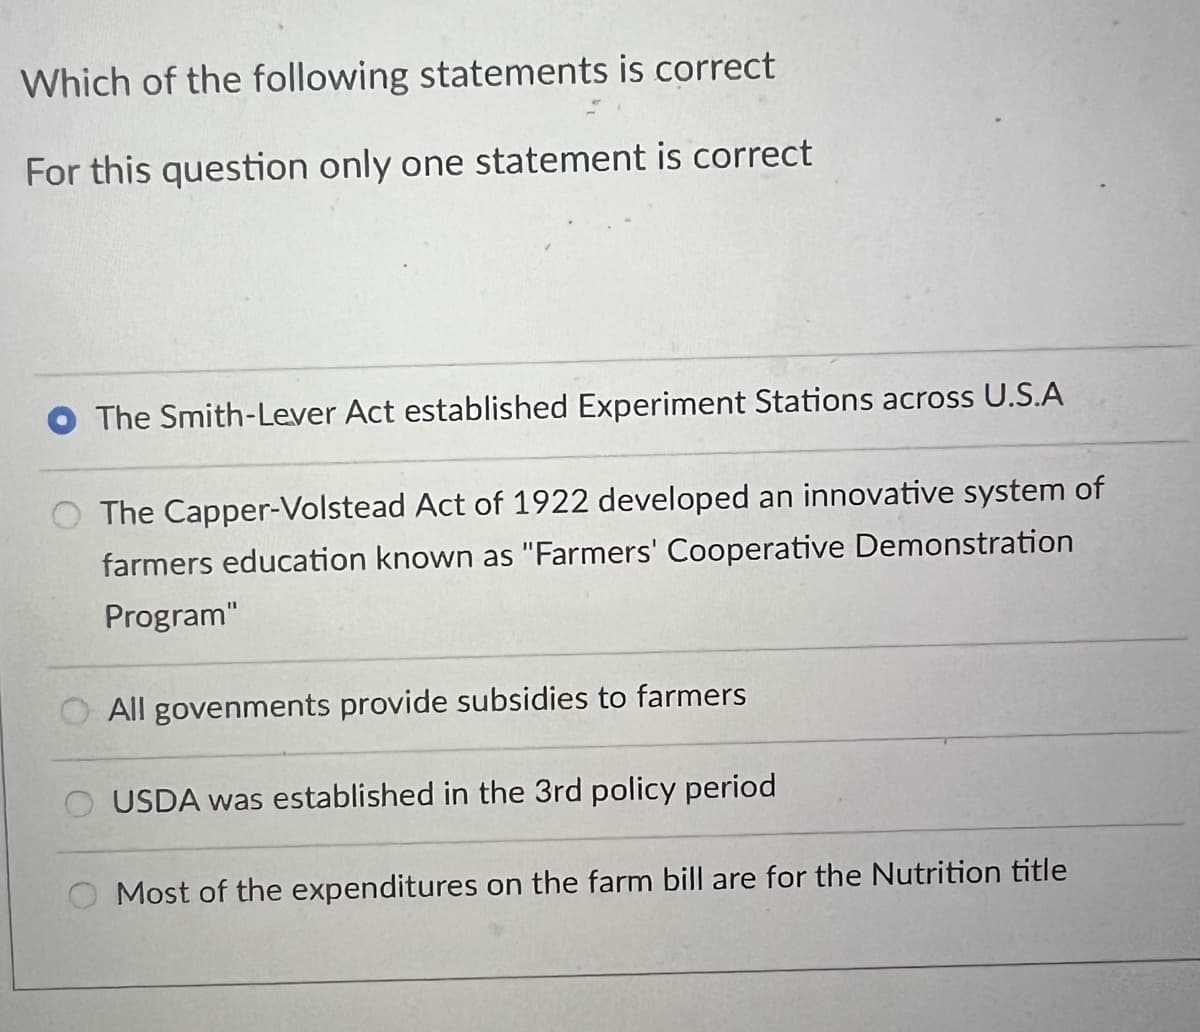 Which of the following statements is correct
For this question only one statement is correct
The Smith-Lever Act established Experiment Stations across U.S.A
The Capper-Volstead Act of 1922 developed an innovative system of
farmers education known as "Farmers' Cooperative Demonstration
Program"
All govenments provide subsidies to farmers
USDA was established in the 3rd policy period
Most of the expenditures on the farm bill are for the Nutrition title